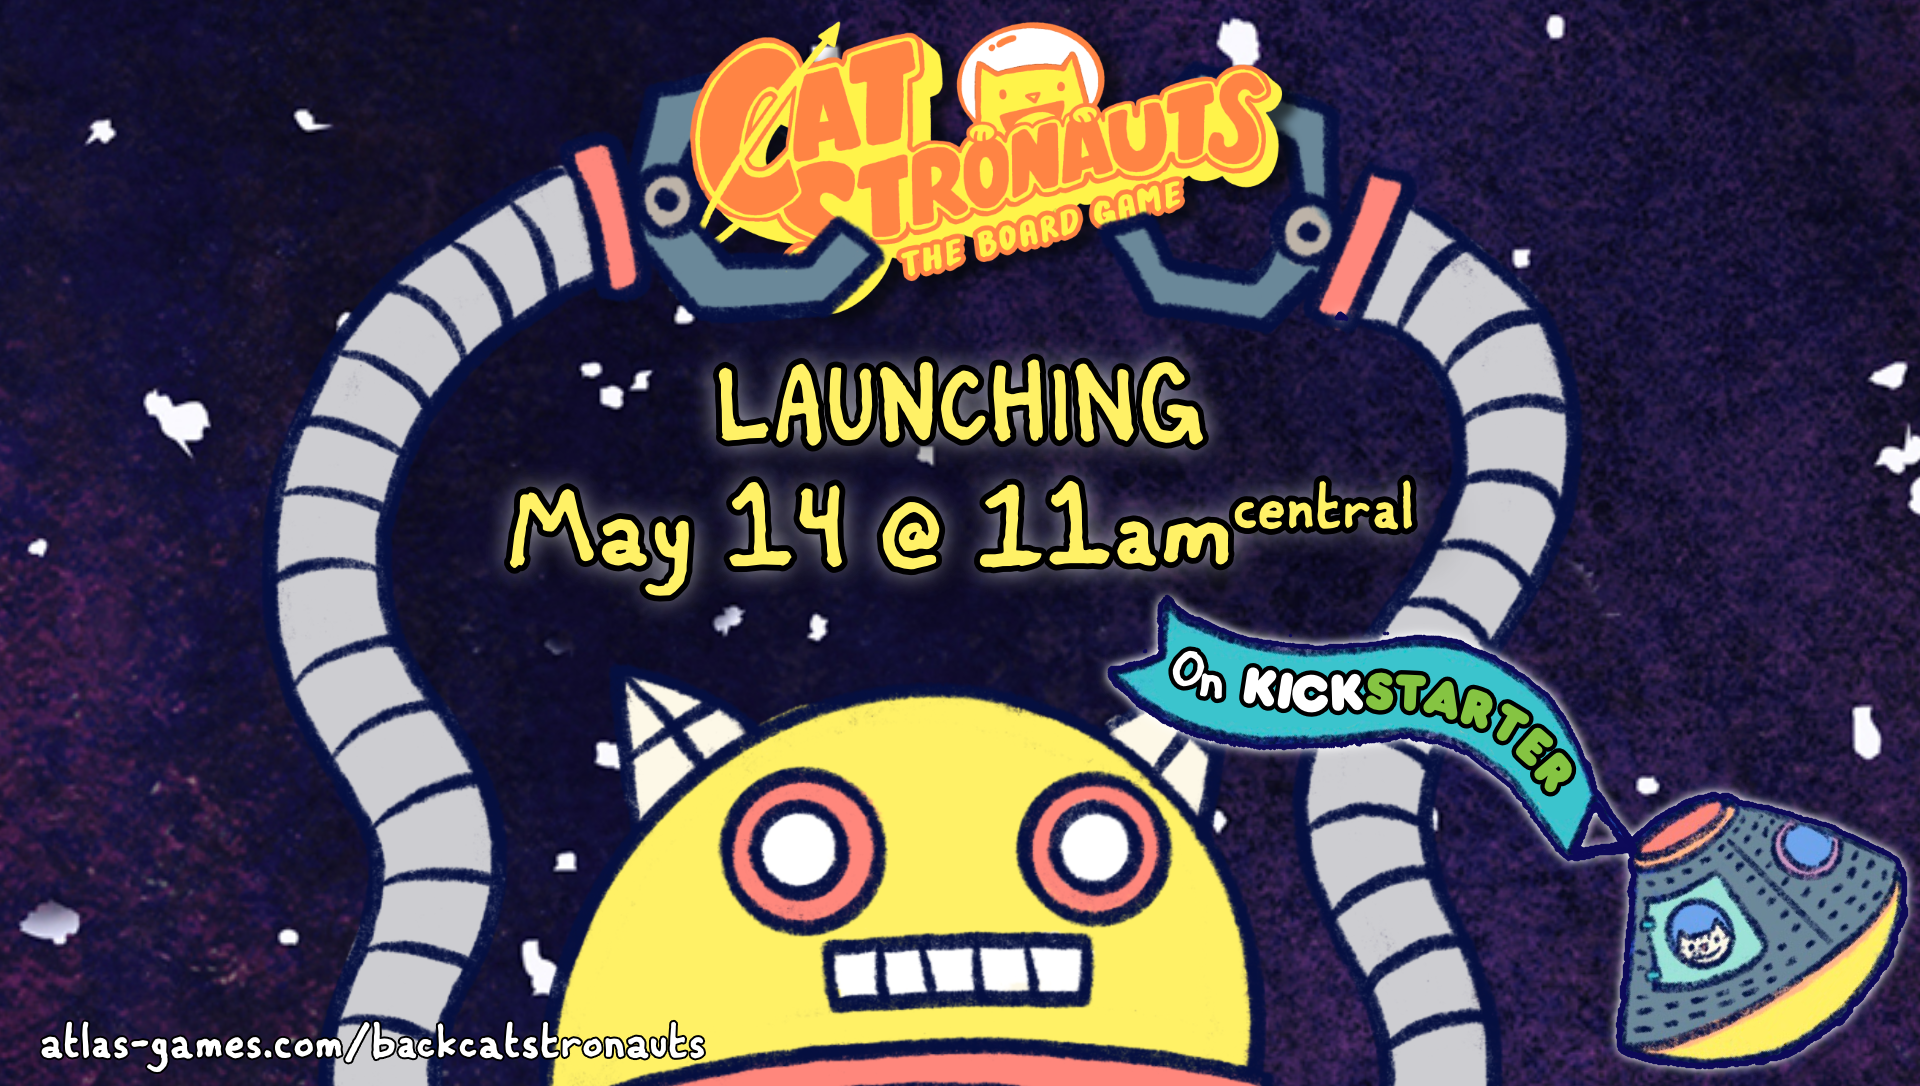 Set Your Alarm for CatStronauts – MAY 14 @11AM Central!